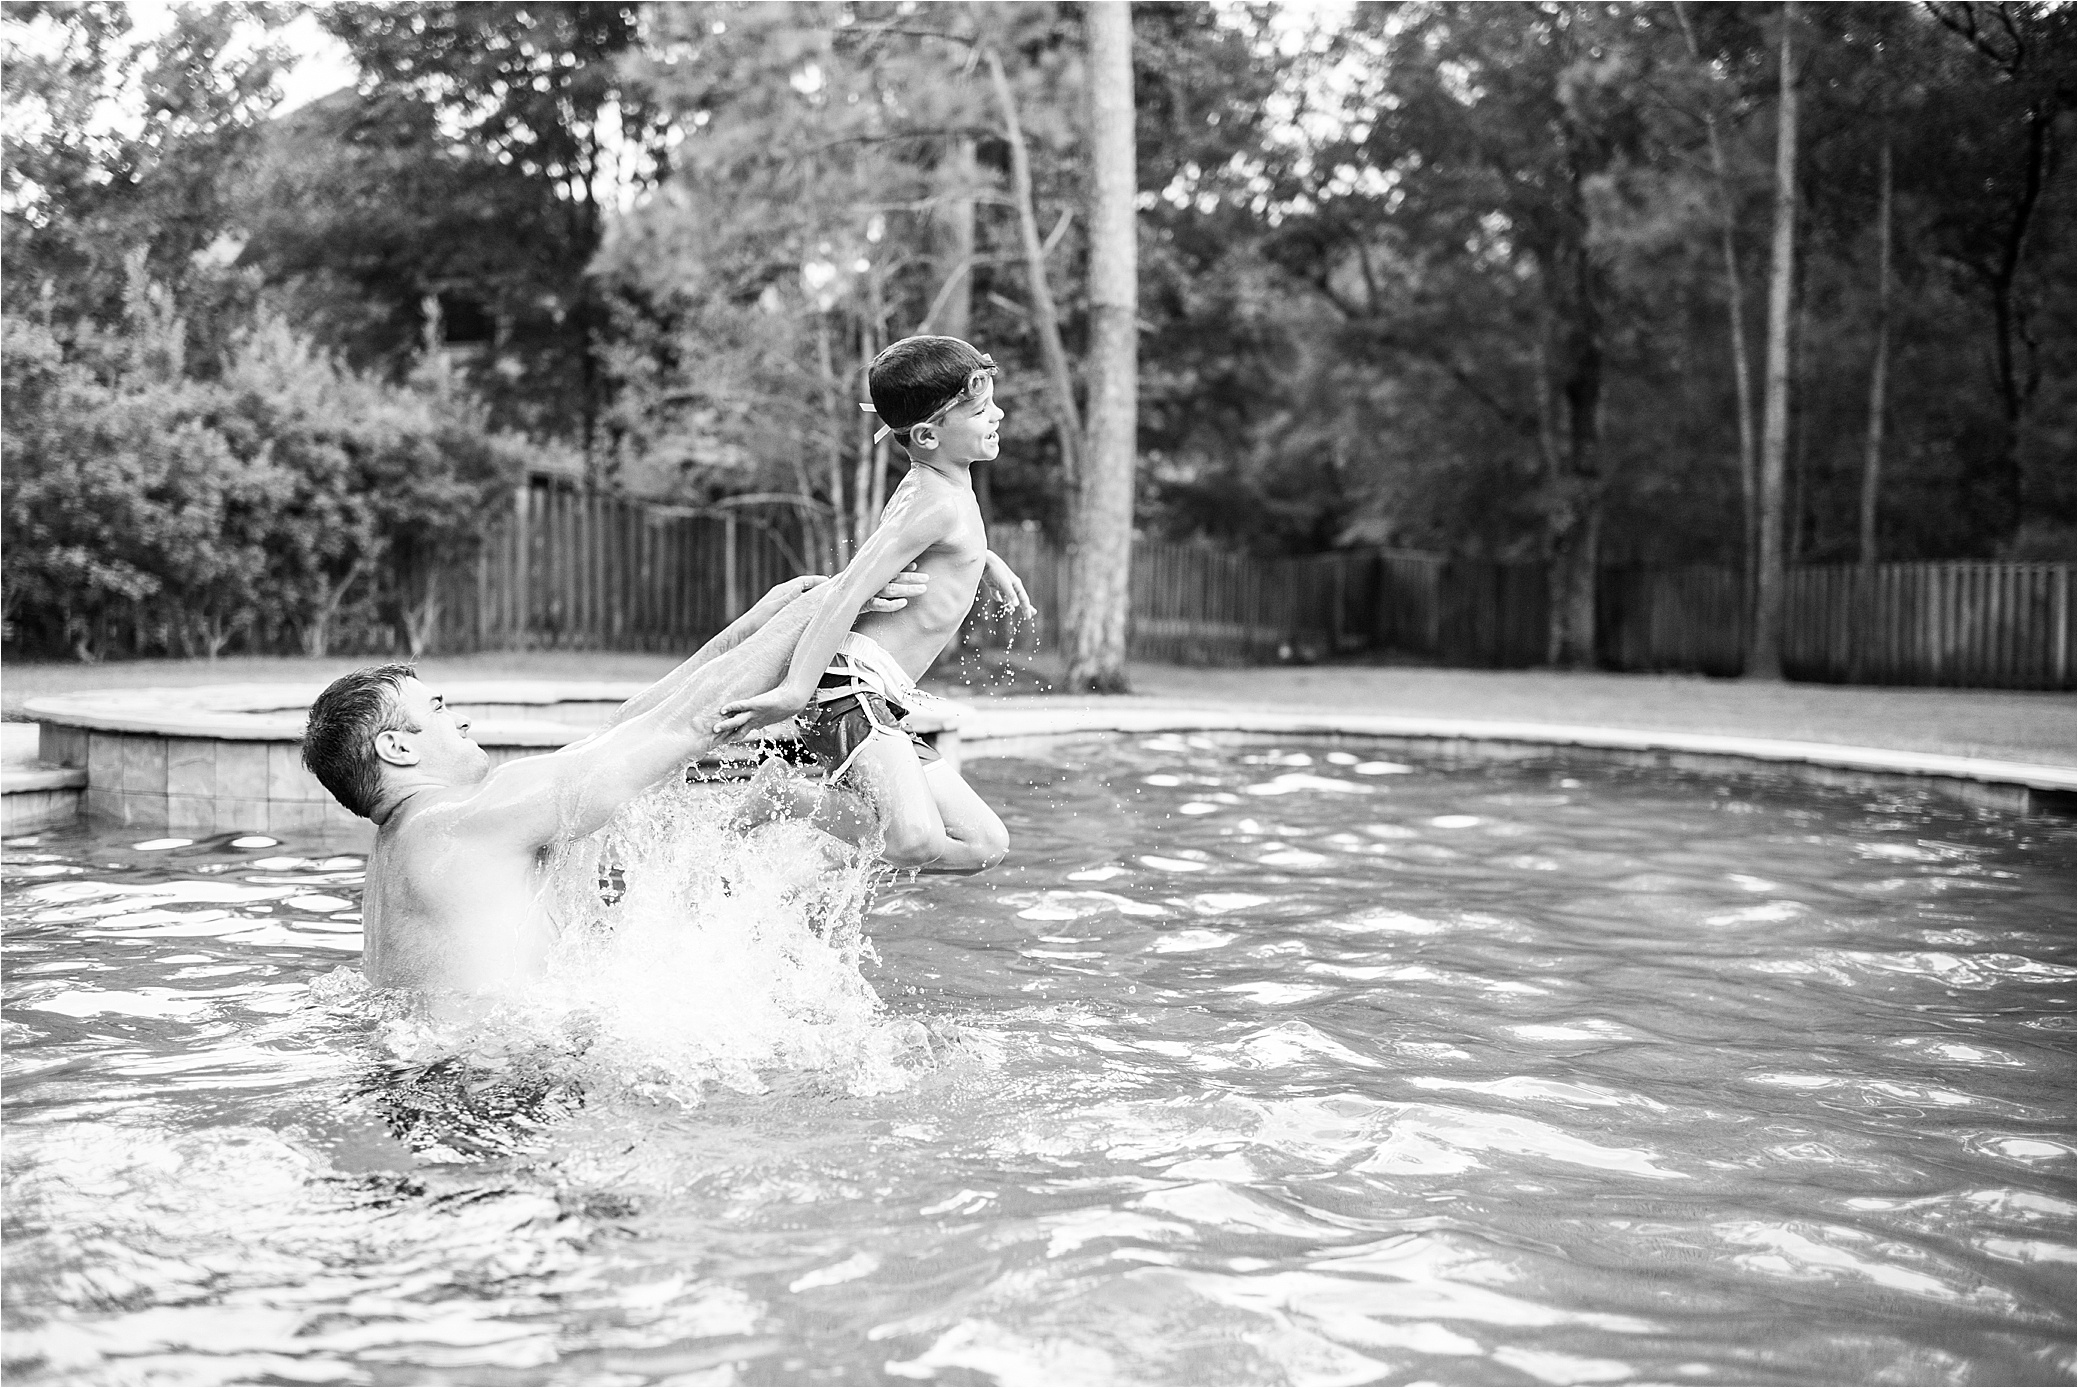 image of dad tossing son up in air, pool photo. black and white.